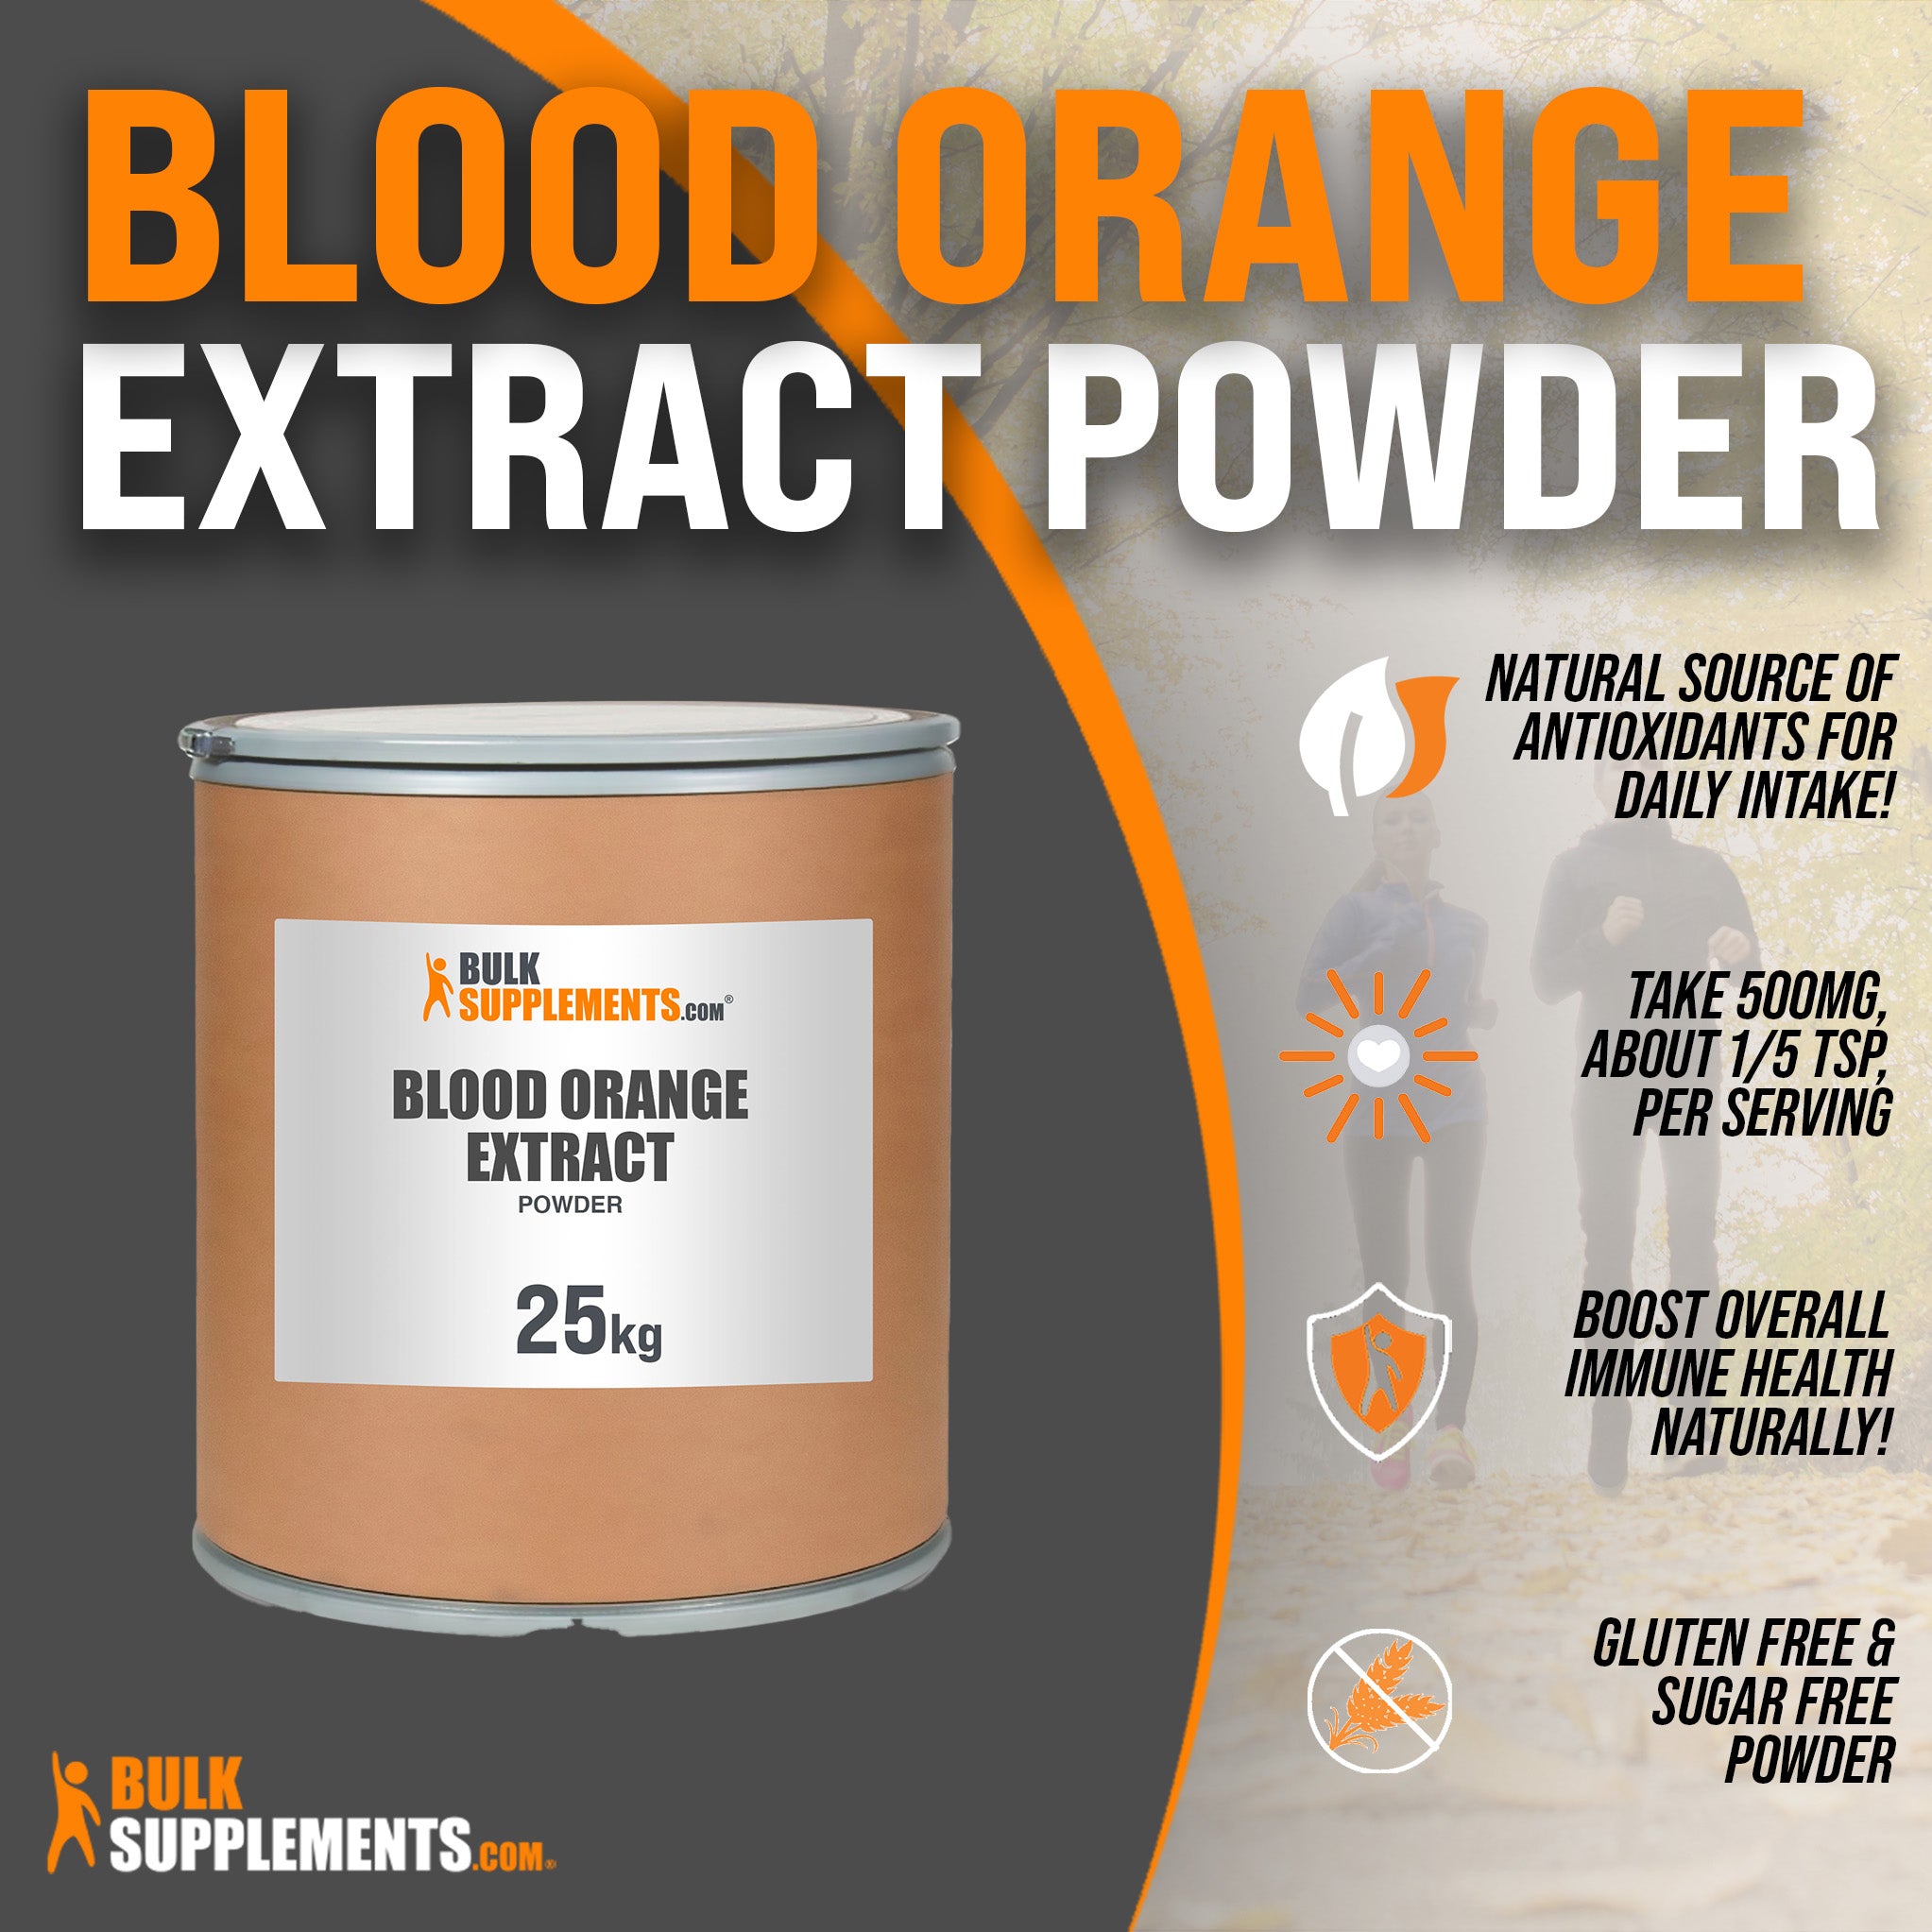 25kg of Blood Orange Extract: An ideal antioxidant supplement